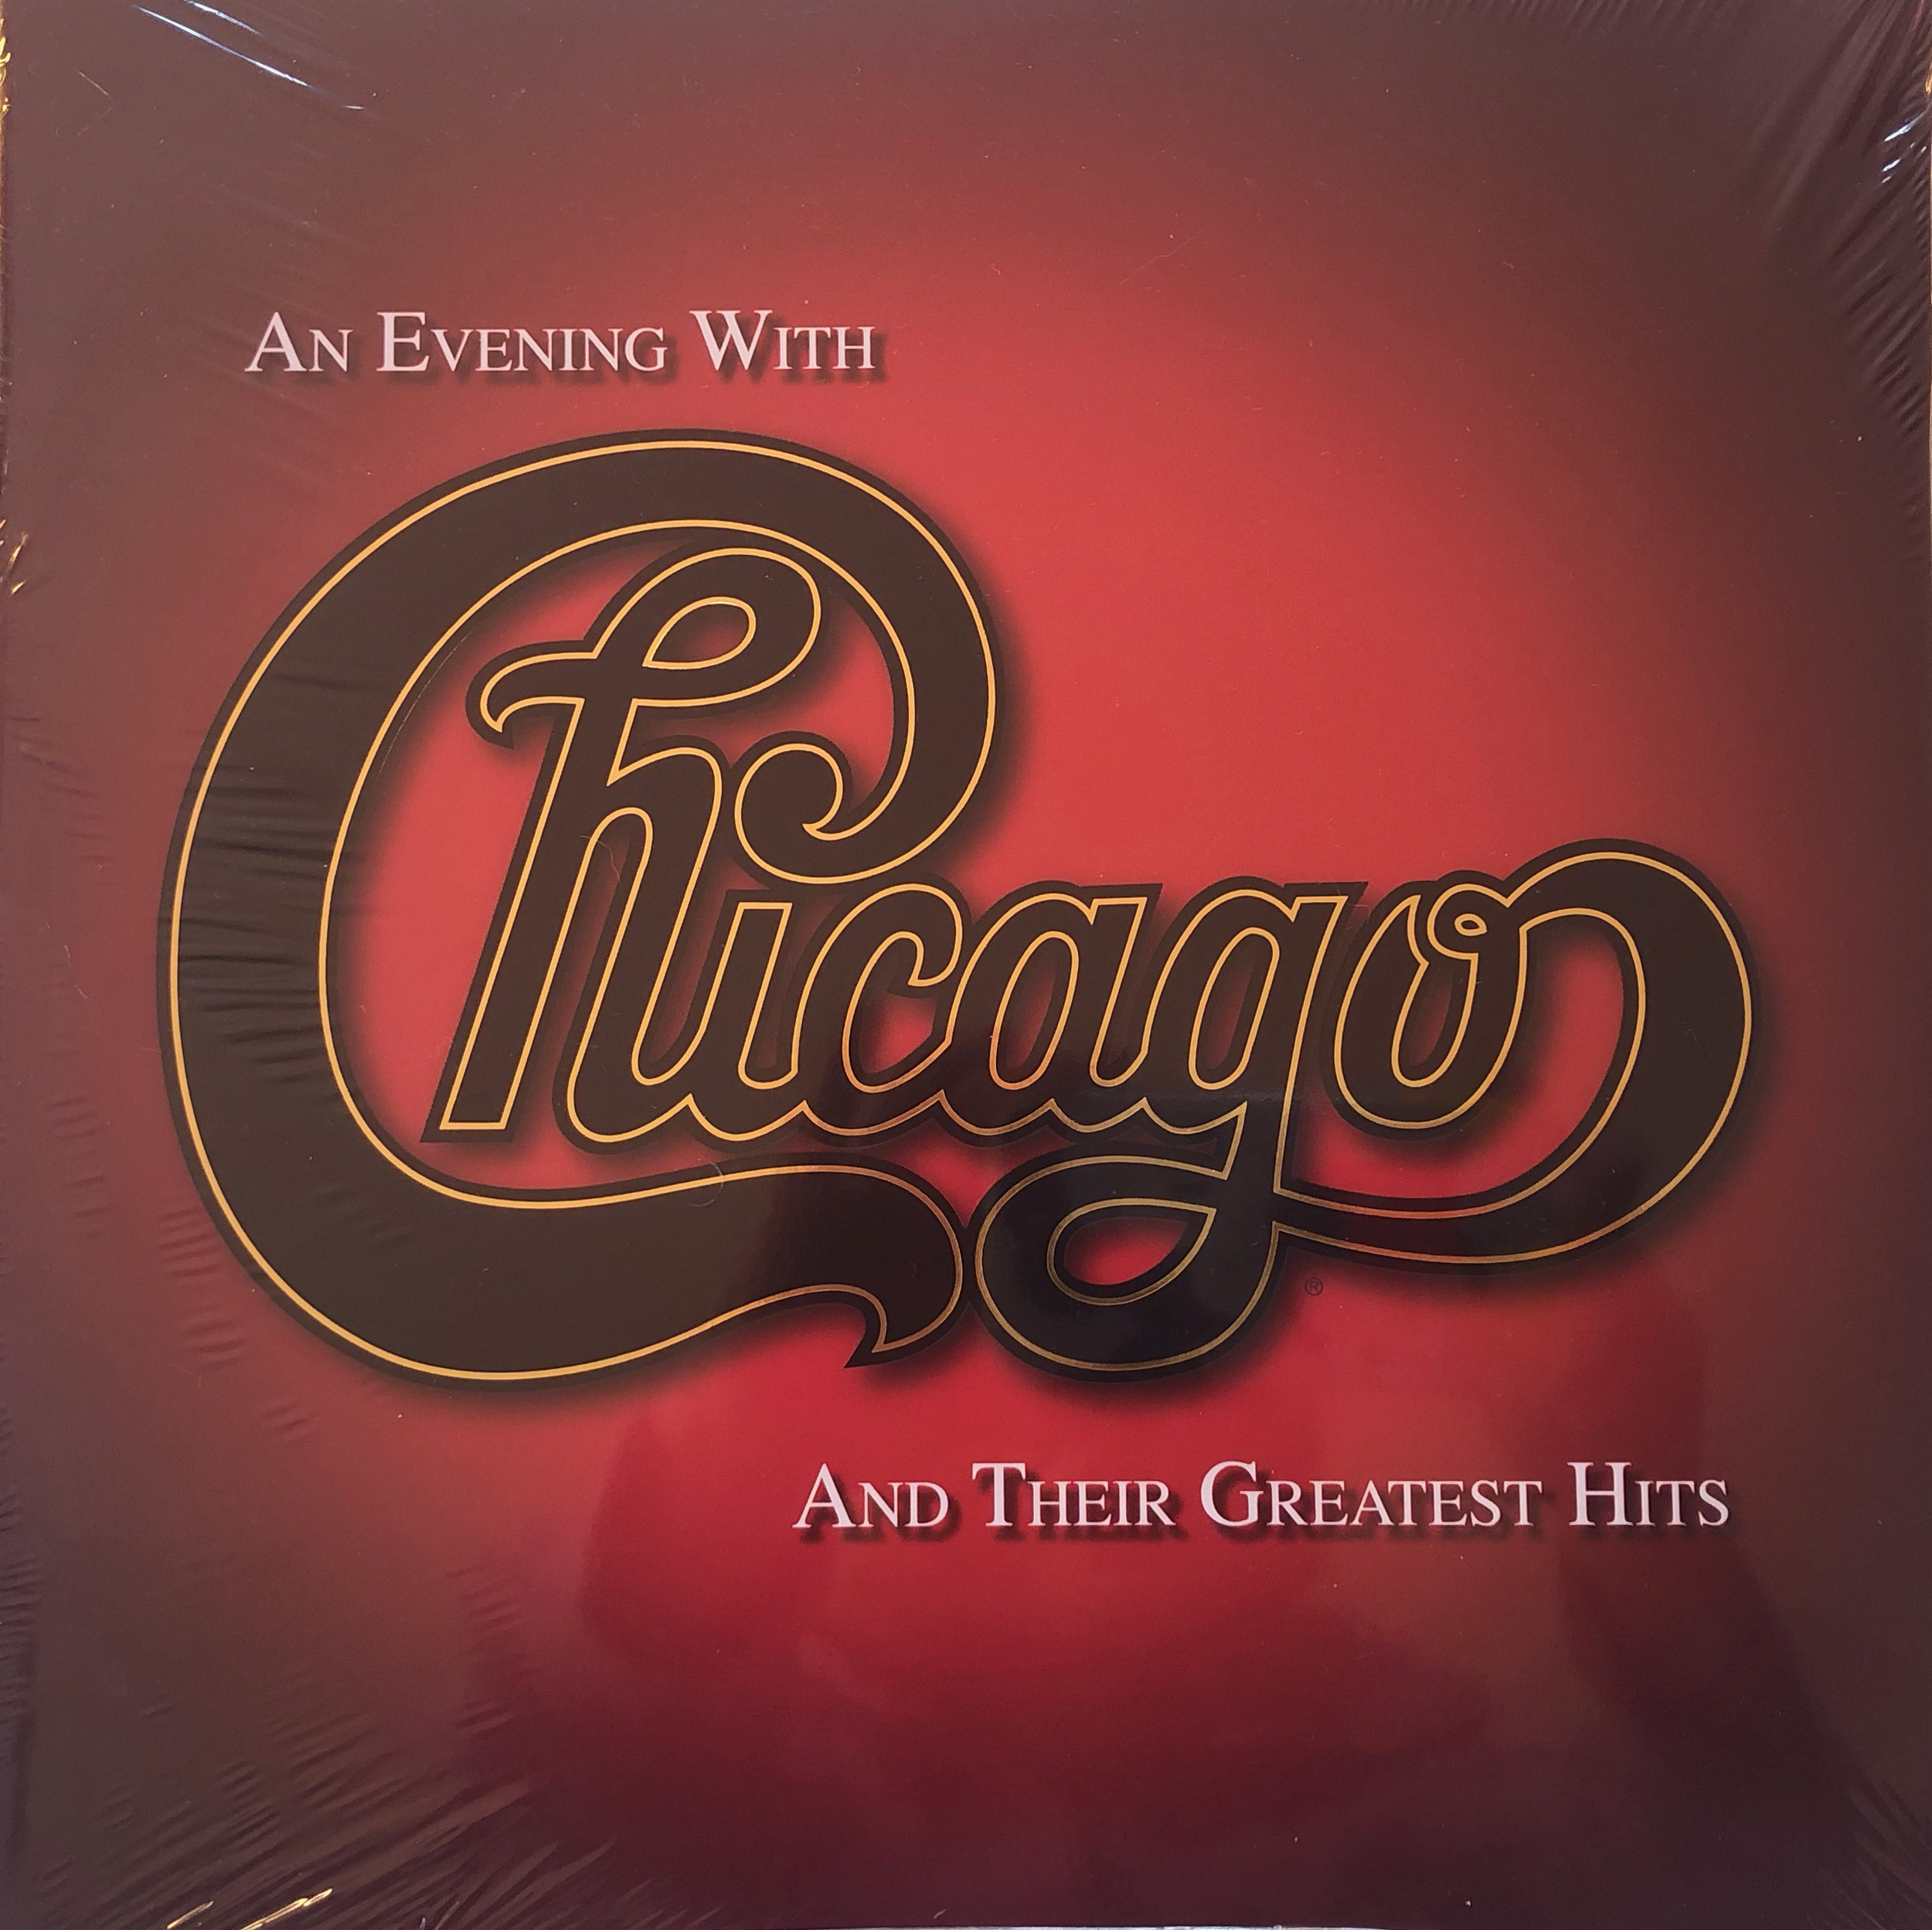 AN EVENING WITH CHICAGO PROGRAM &amp; TRIBUTE